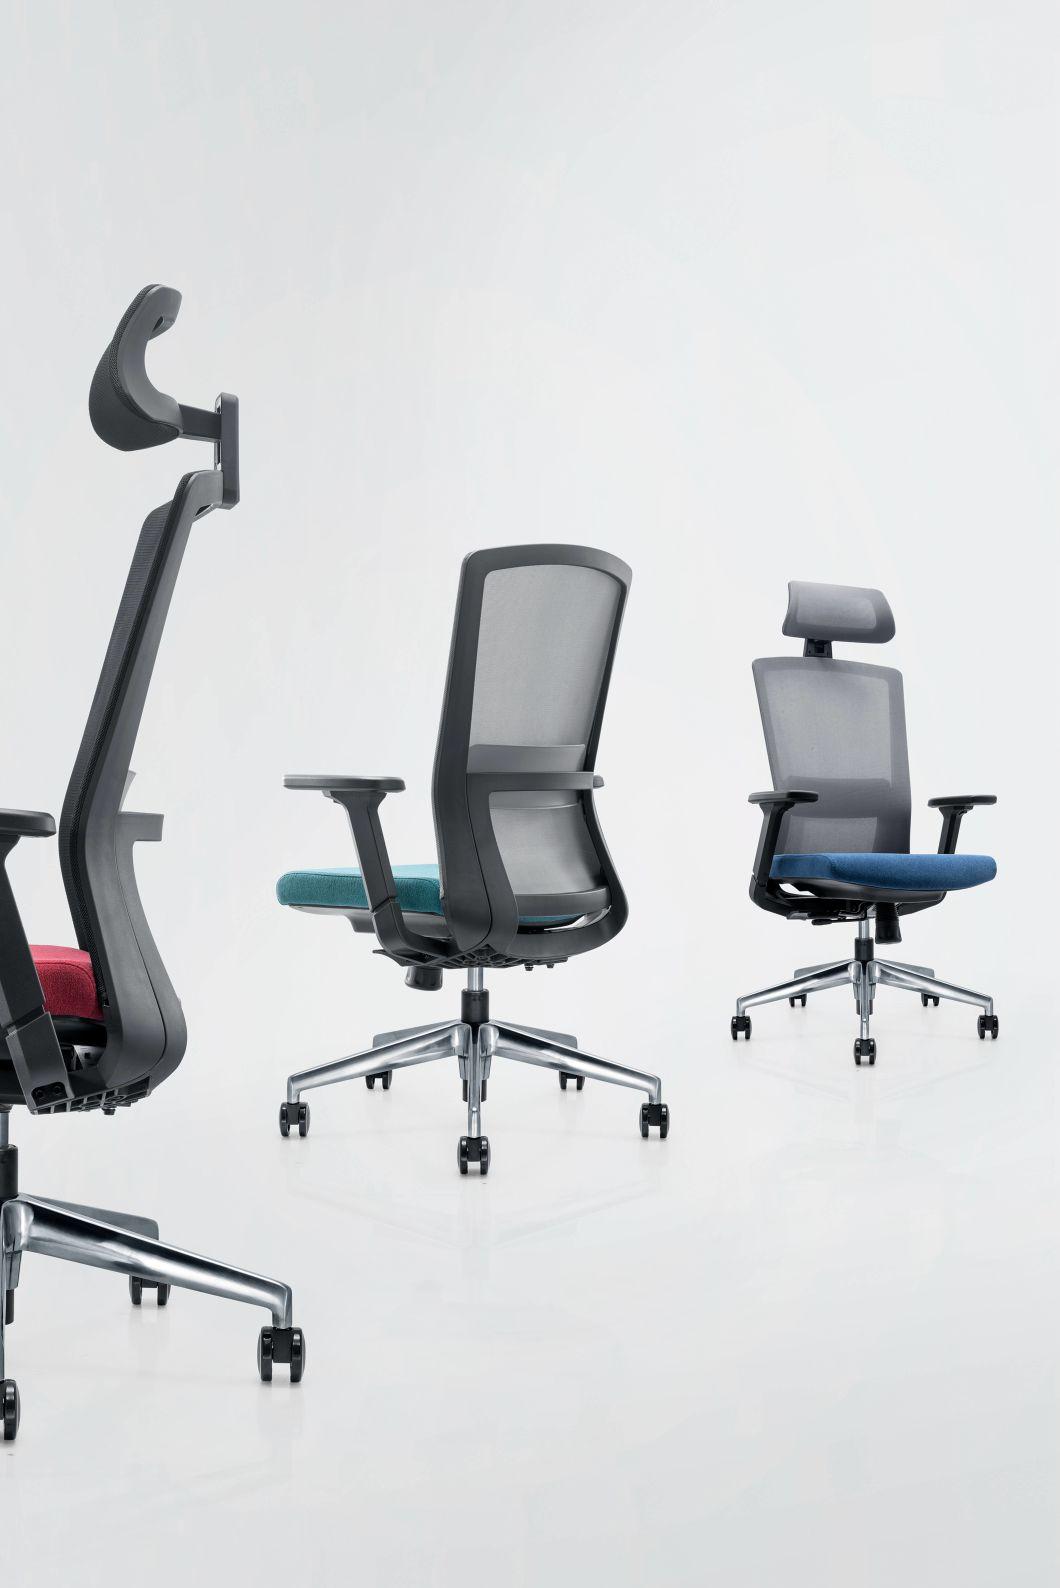 Foshan with Armrest Plastic Ergonomic Wholesale Chairs Furniture Office Chair Good Service